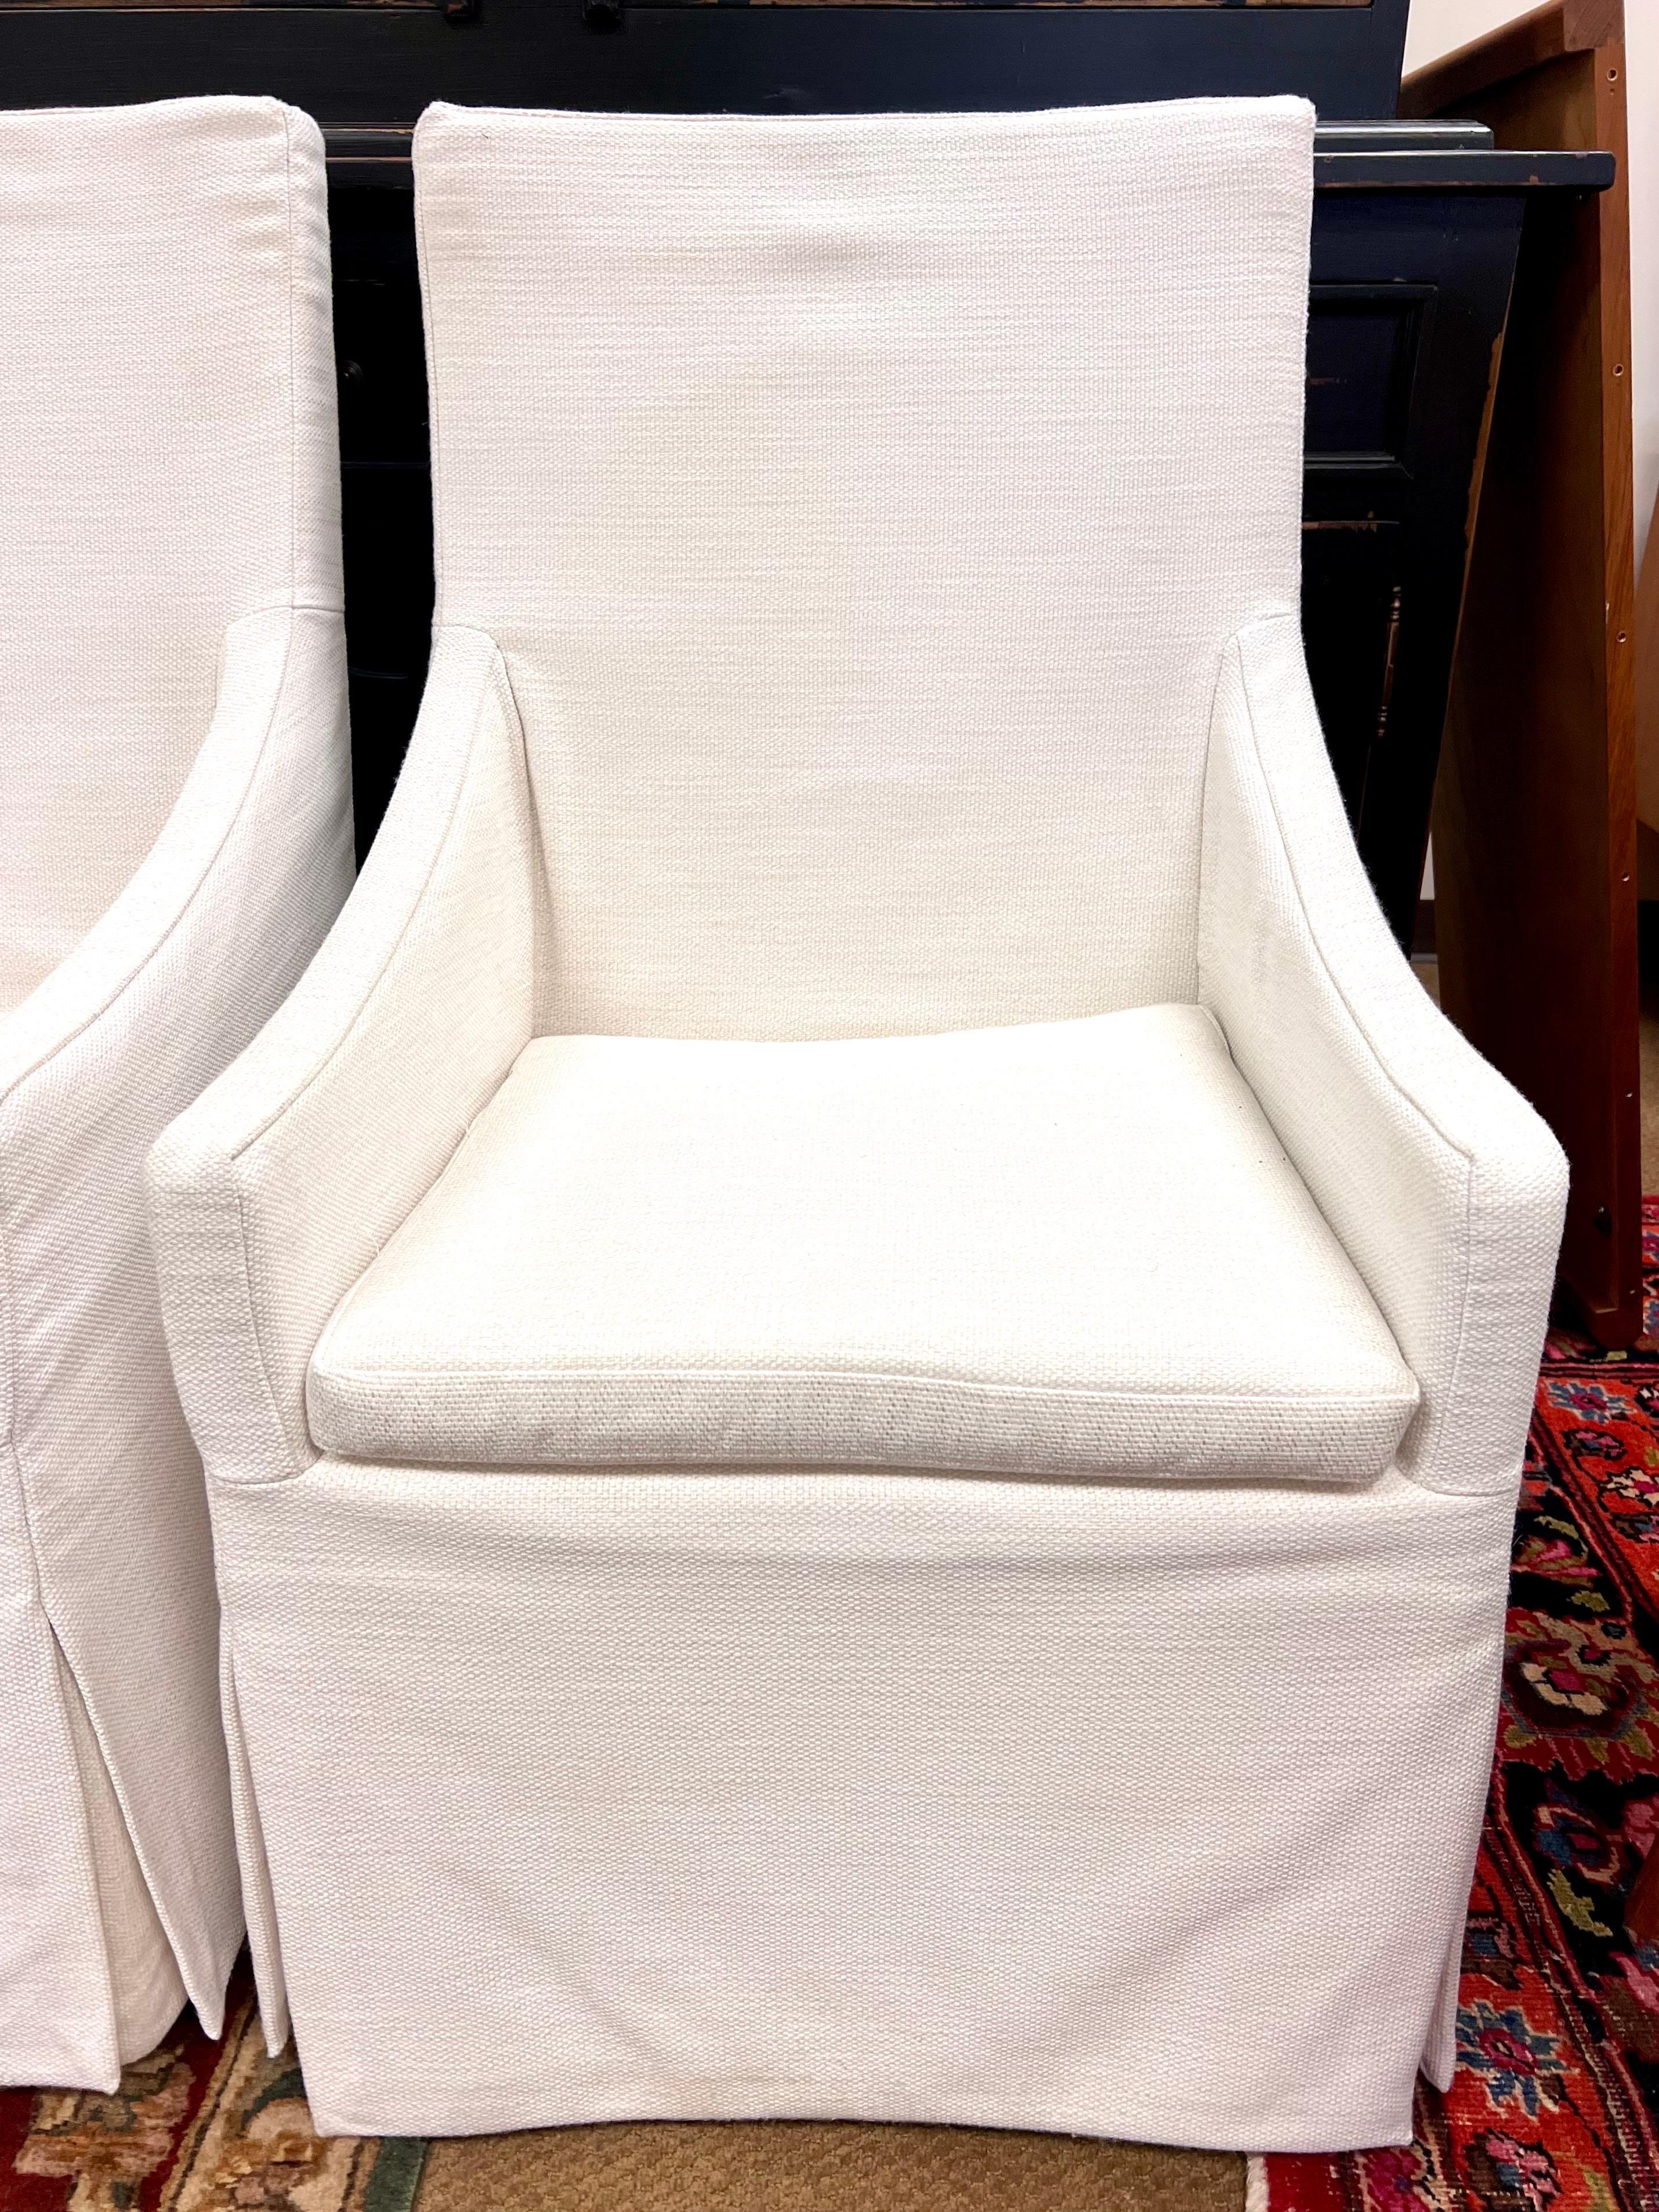 Elegant pair of RH Belgian linen slop arm dining chairs.  Look for accompanying set of side chairs also from RH in a separate listing
on Dibs as well.  These are big and heavy chairs.  We are based in CT on the east coast of the US and may be able